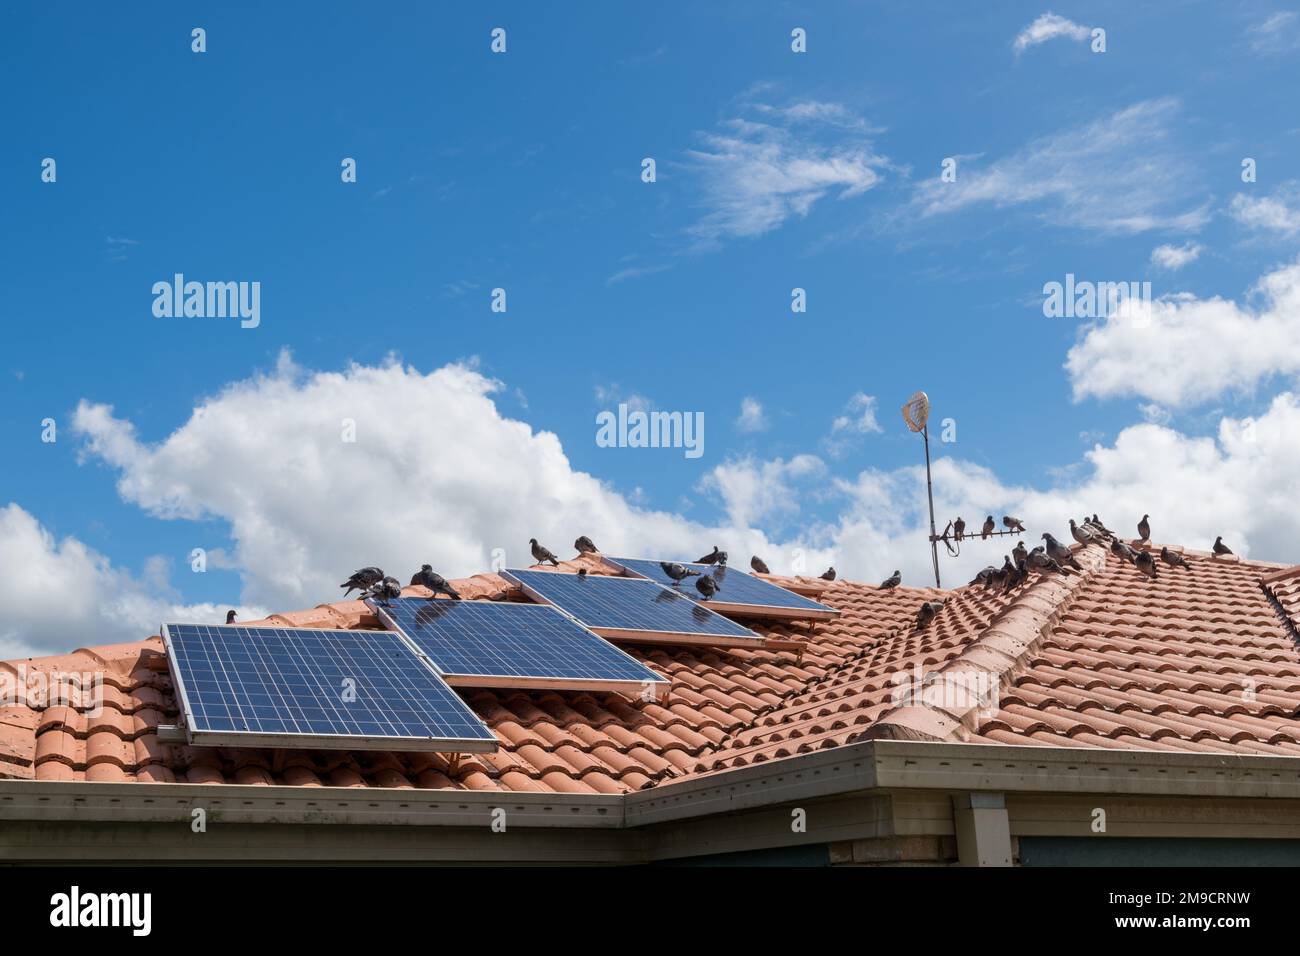 Solar panels on the roof of a house covered with pigeon droppings and roosting pigeons Stock Photo